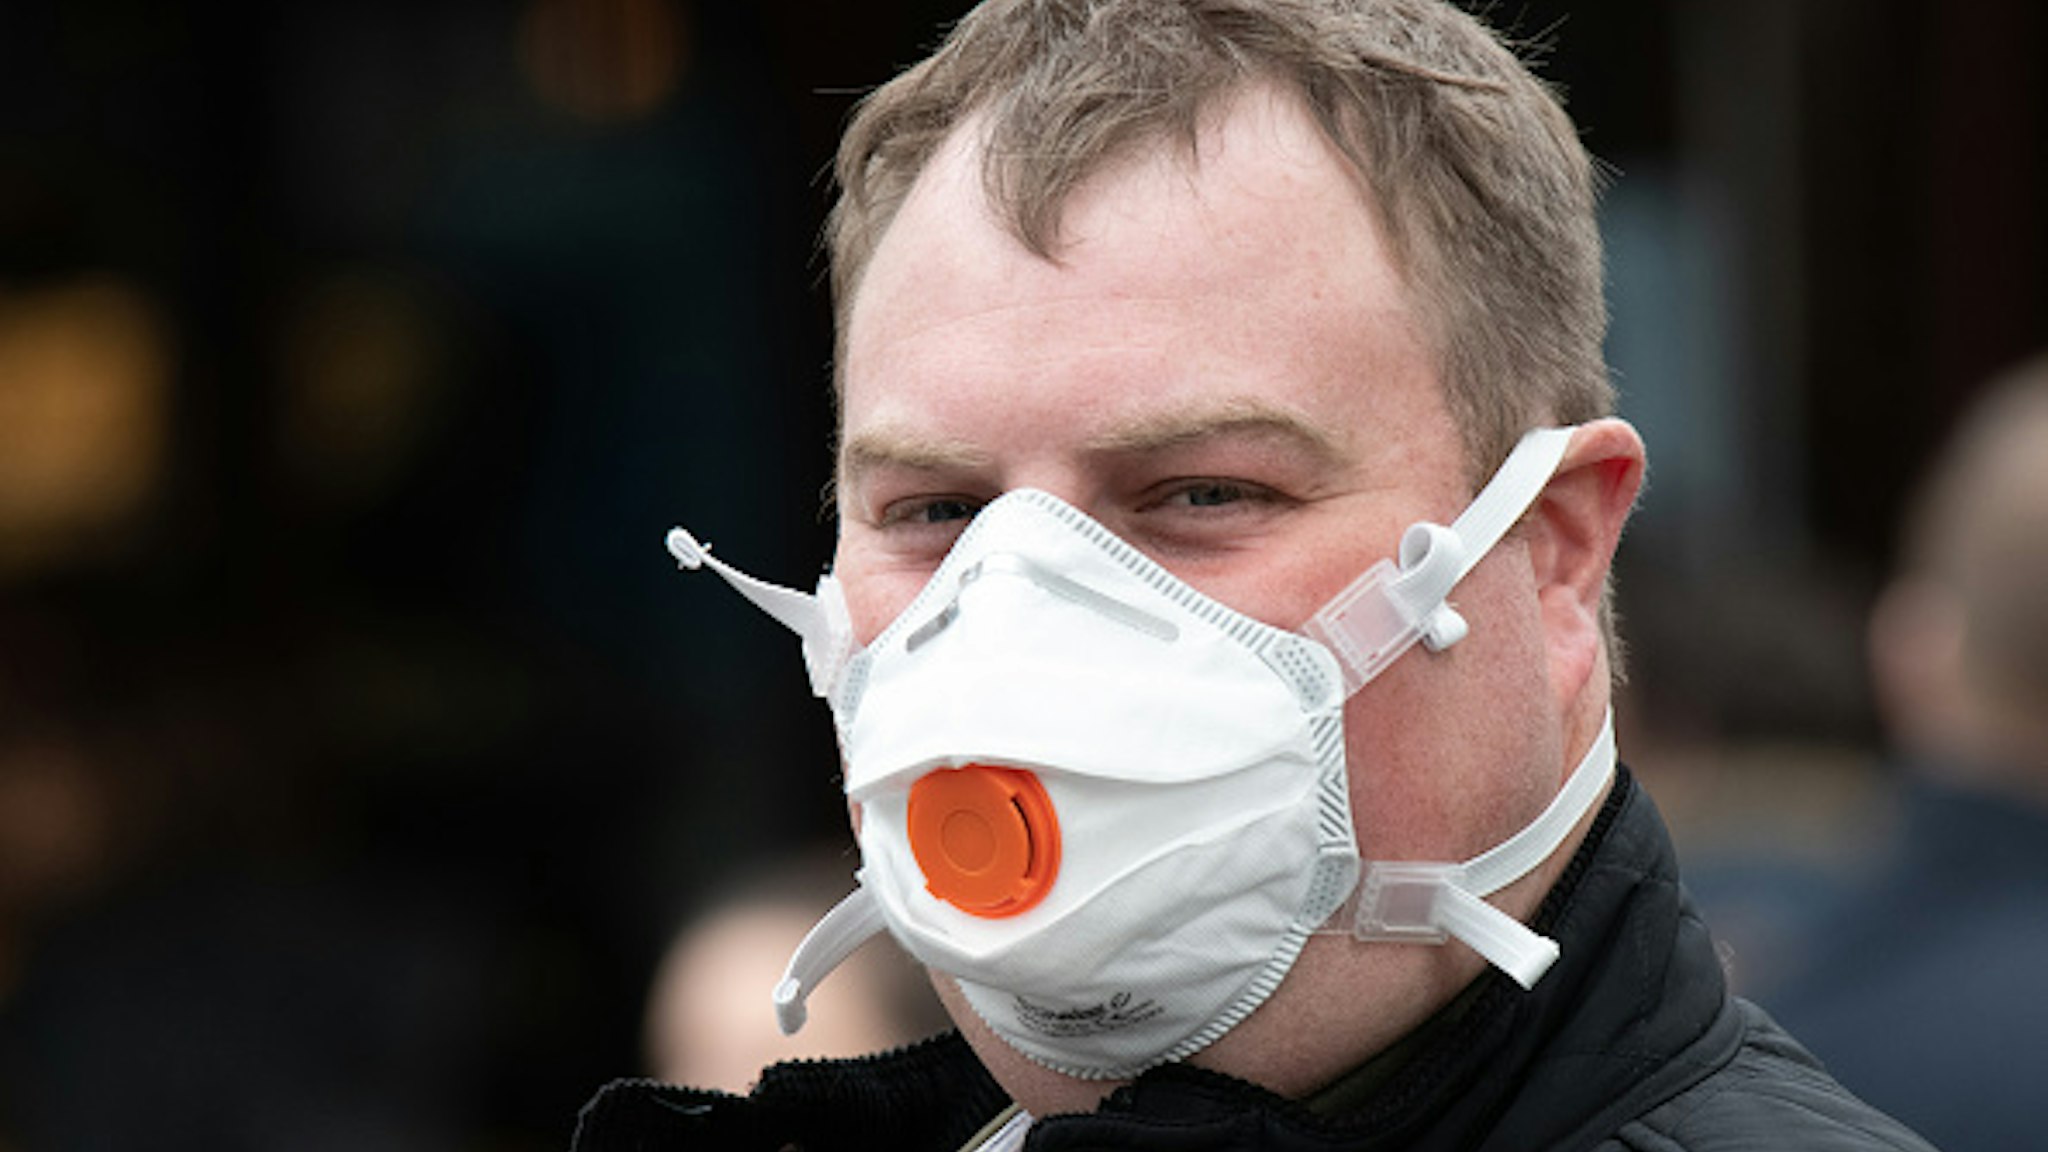 CARDIFF, UNITED KINGDOM - MARCH 14: A man wears a N95 protective respirator mask on March 14, 2020 in Cardiff, United Kingdom.